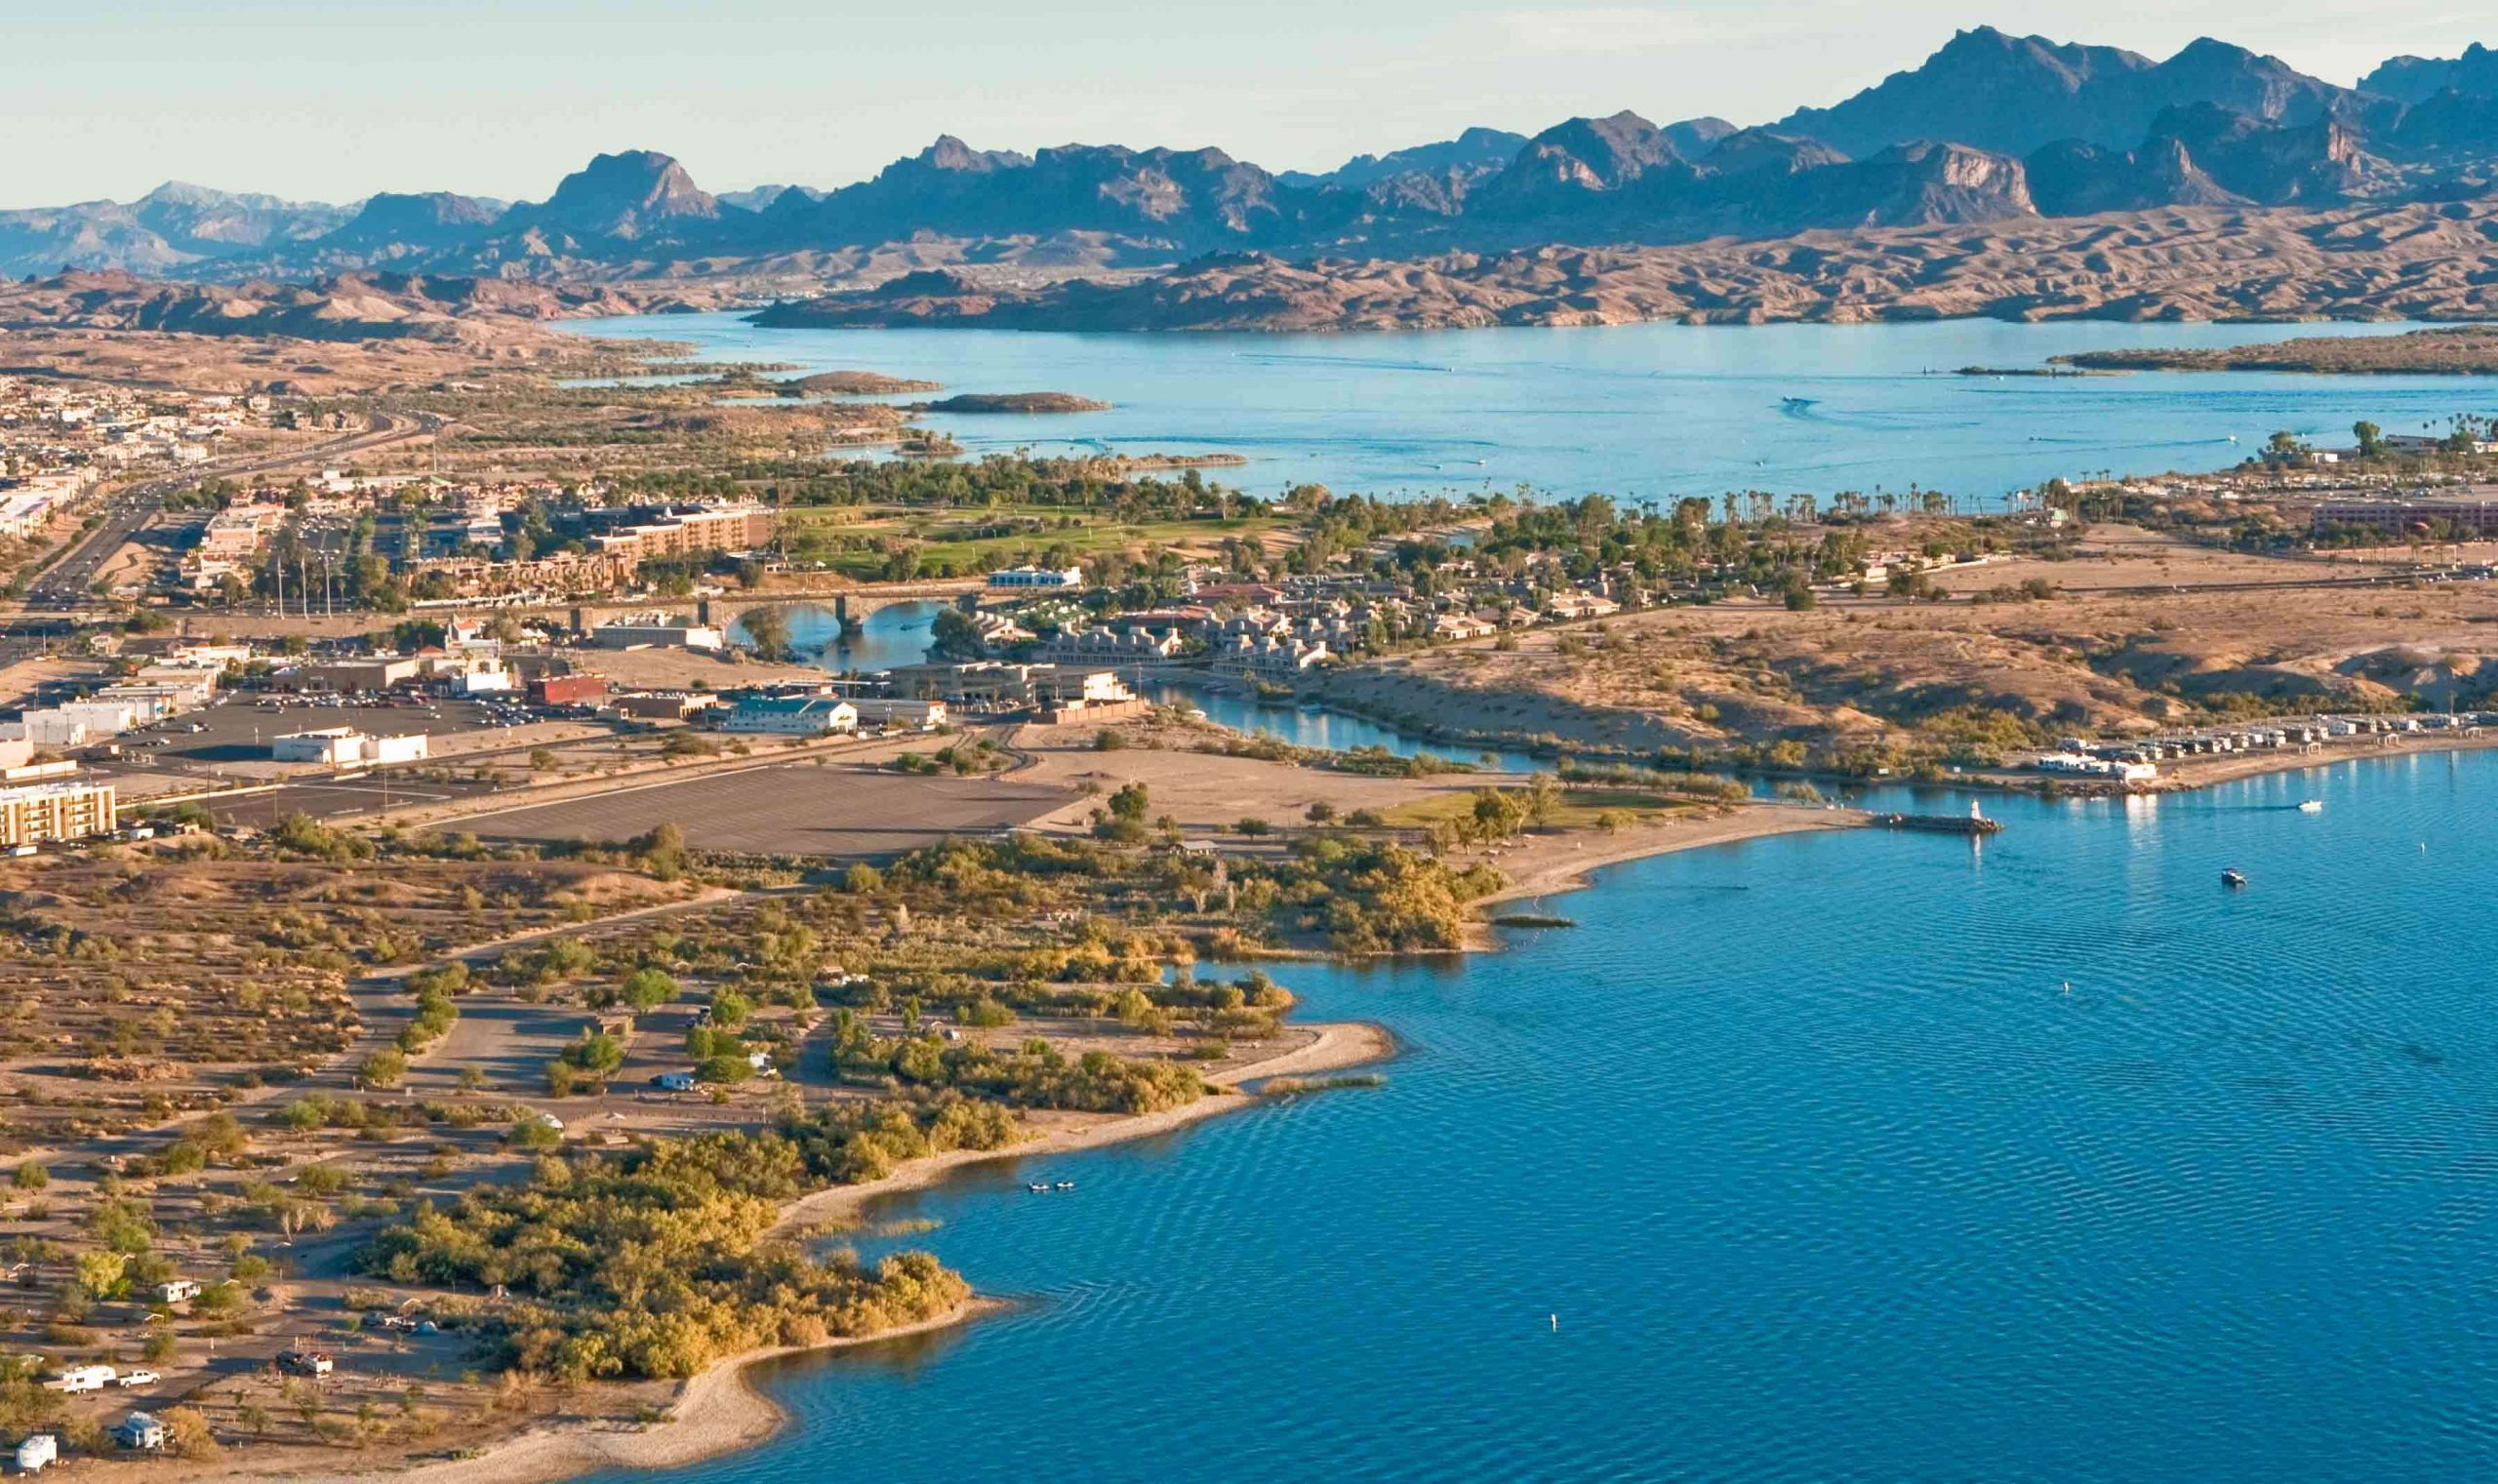 <b>Lake Havasu, Arizona</b><br>
Consistent. That single word describes the stellar career of Rojas. What laid the framework for his two decades of success happened early on at Lake Havasu, his favorite lake. âIt was a great training ground for me to learn a lot of different techniques, become a versatile angler.â Rojas moved there 18 years ago and lives there today. He placed sixth at the 2015 Elite Series event on his home lake.
